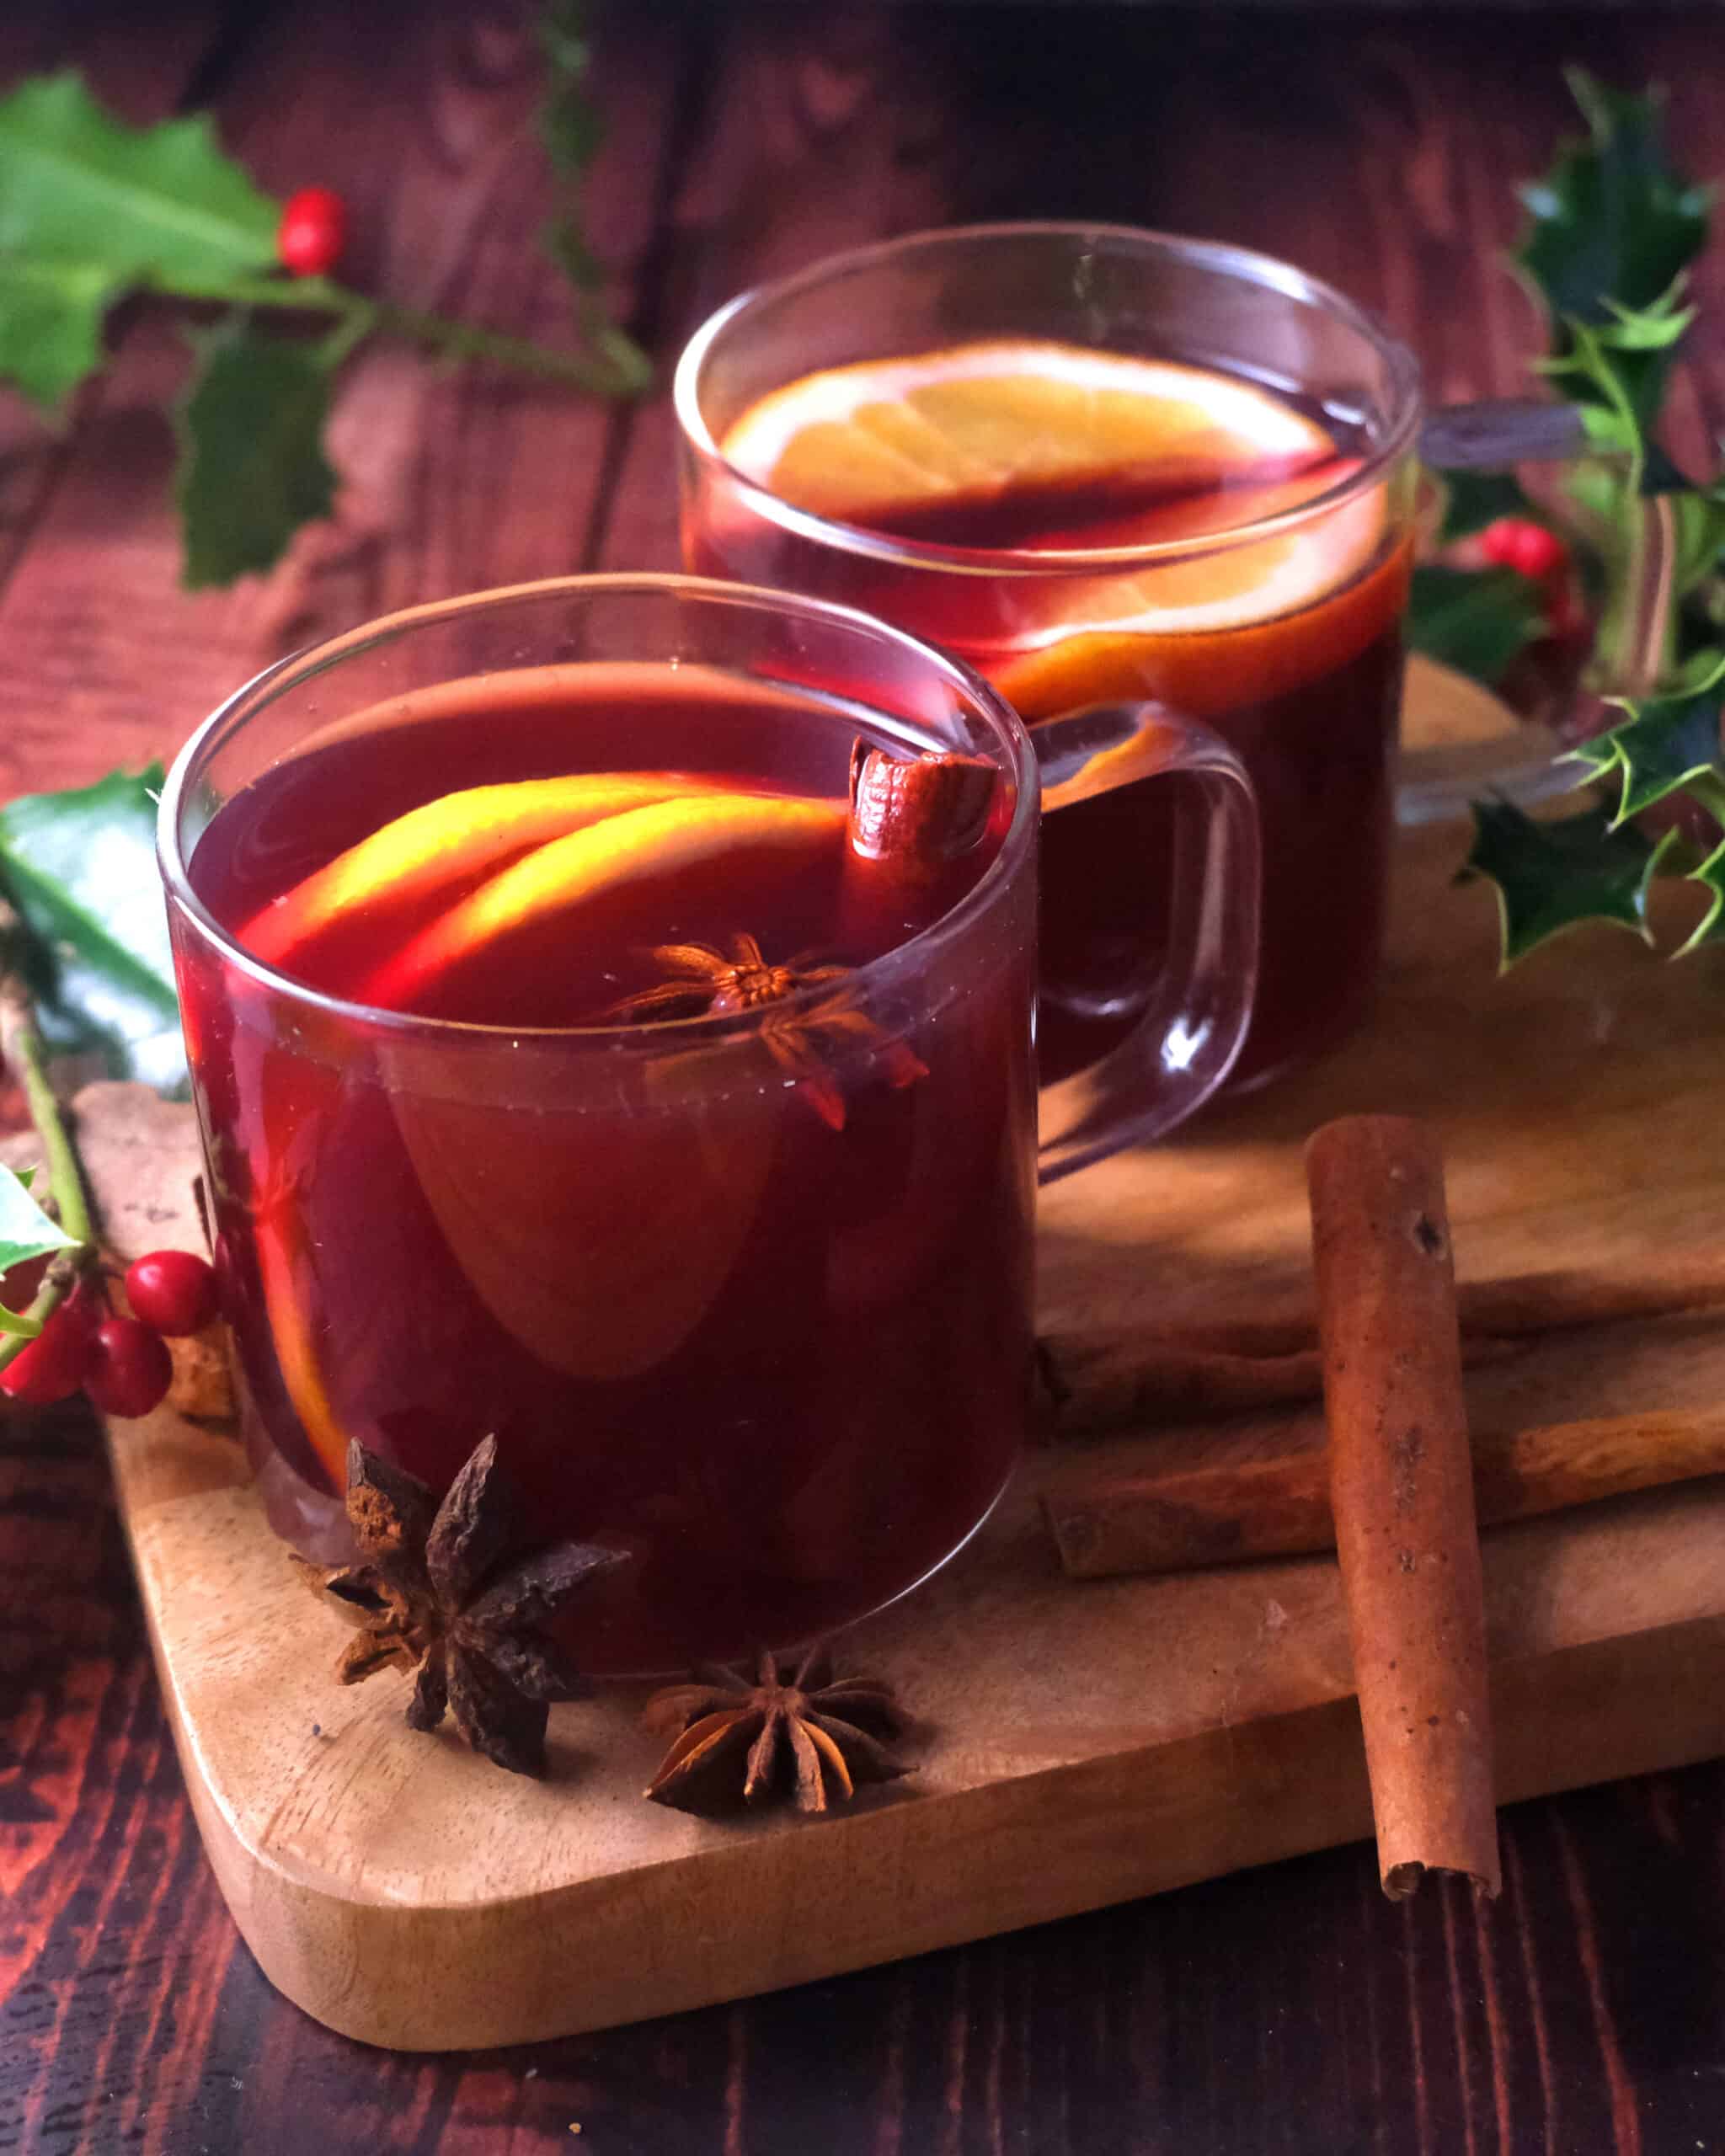 to cups of German mulled wine.